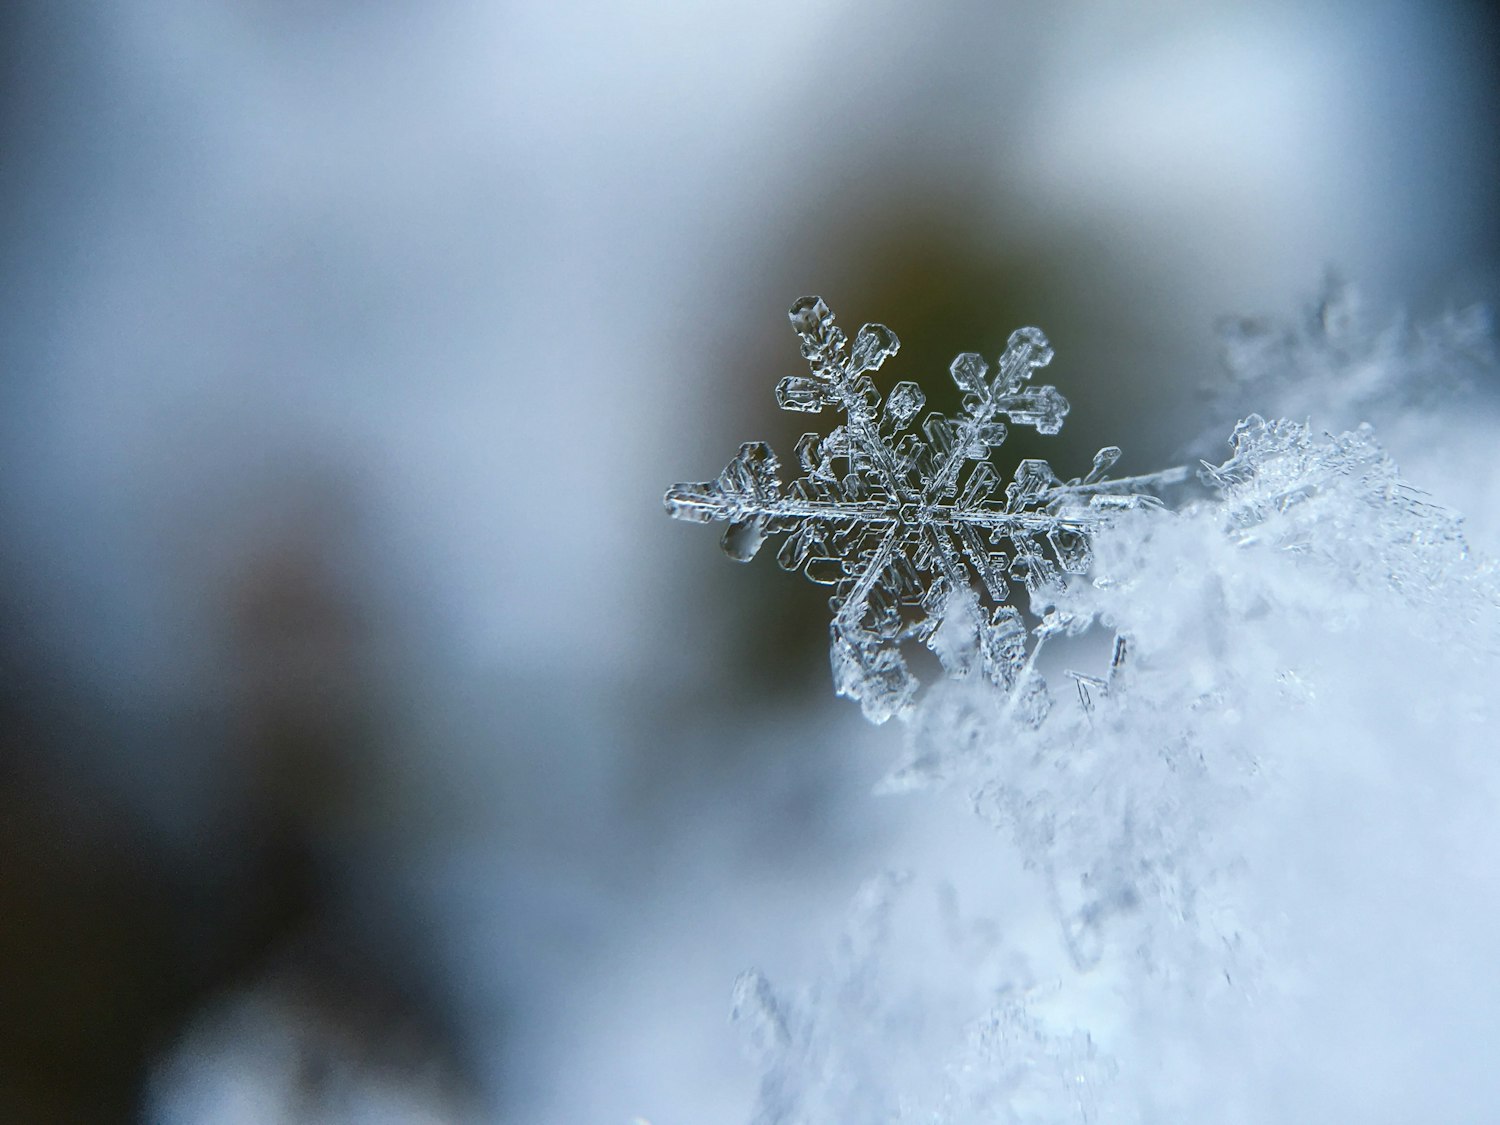 focused photo of a snow flake by Aaron Burden